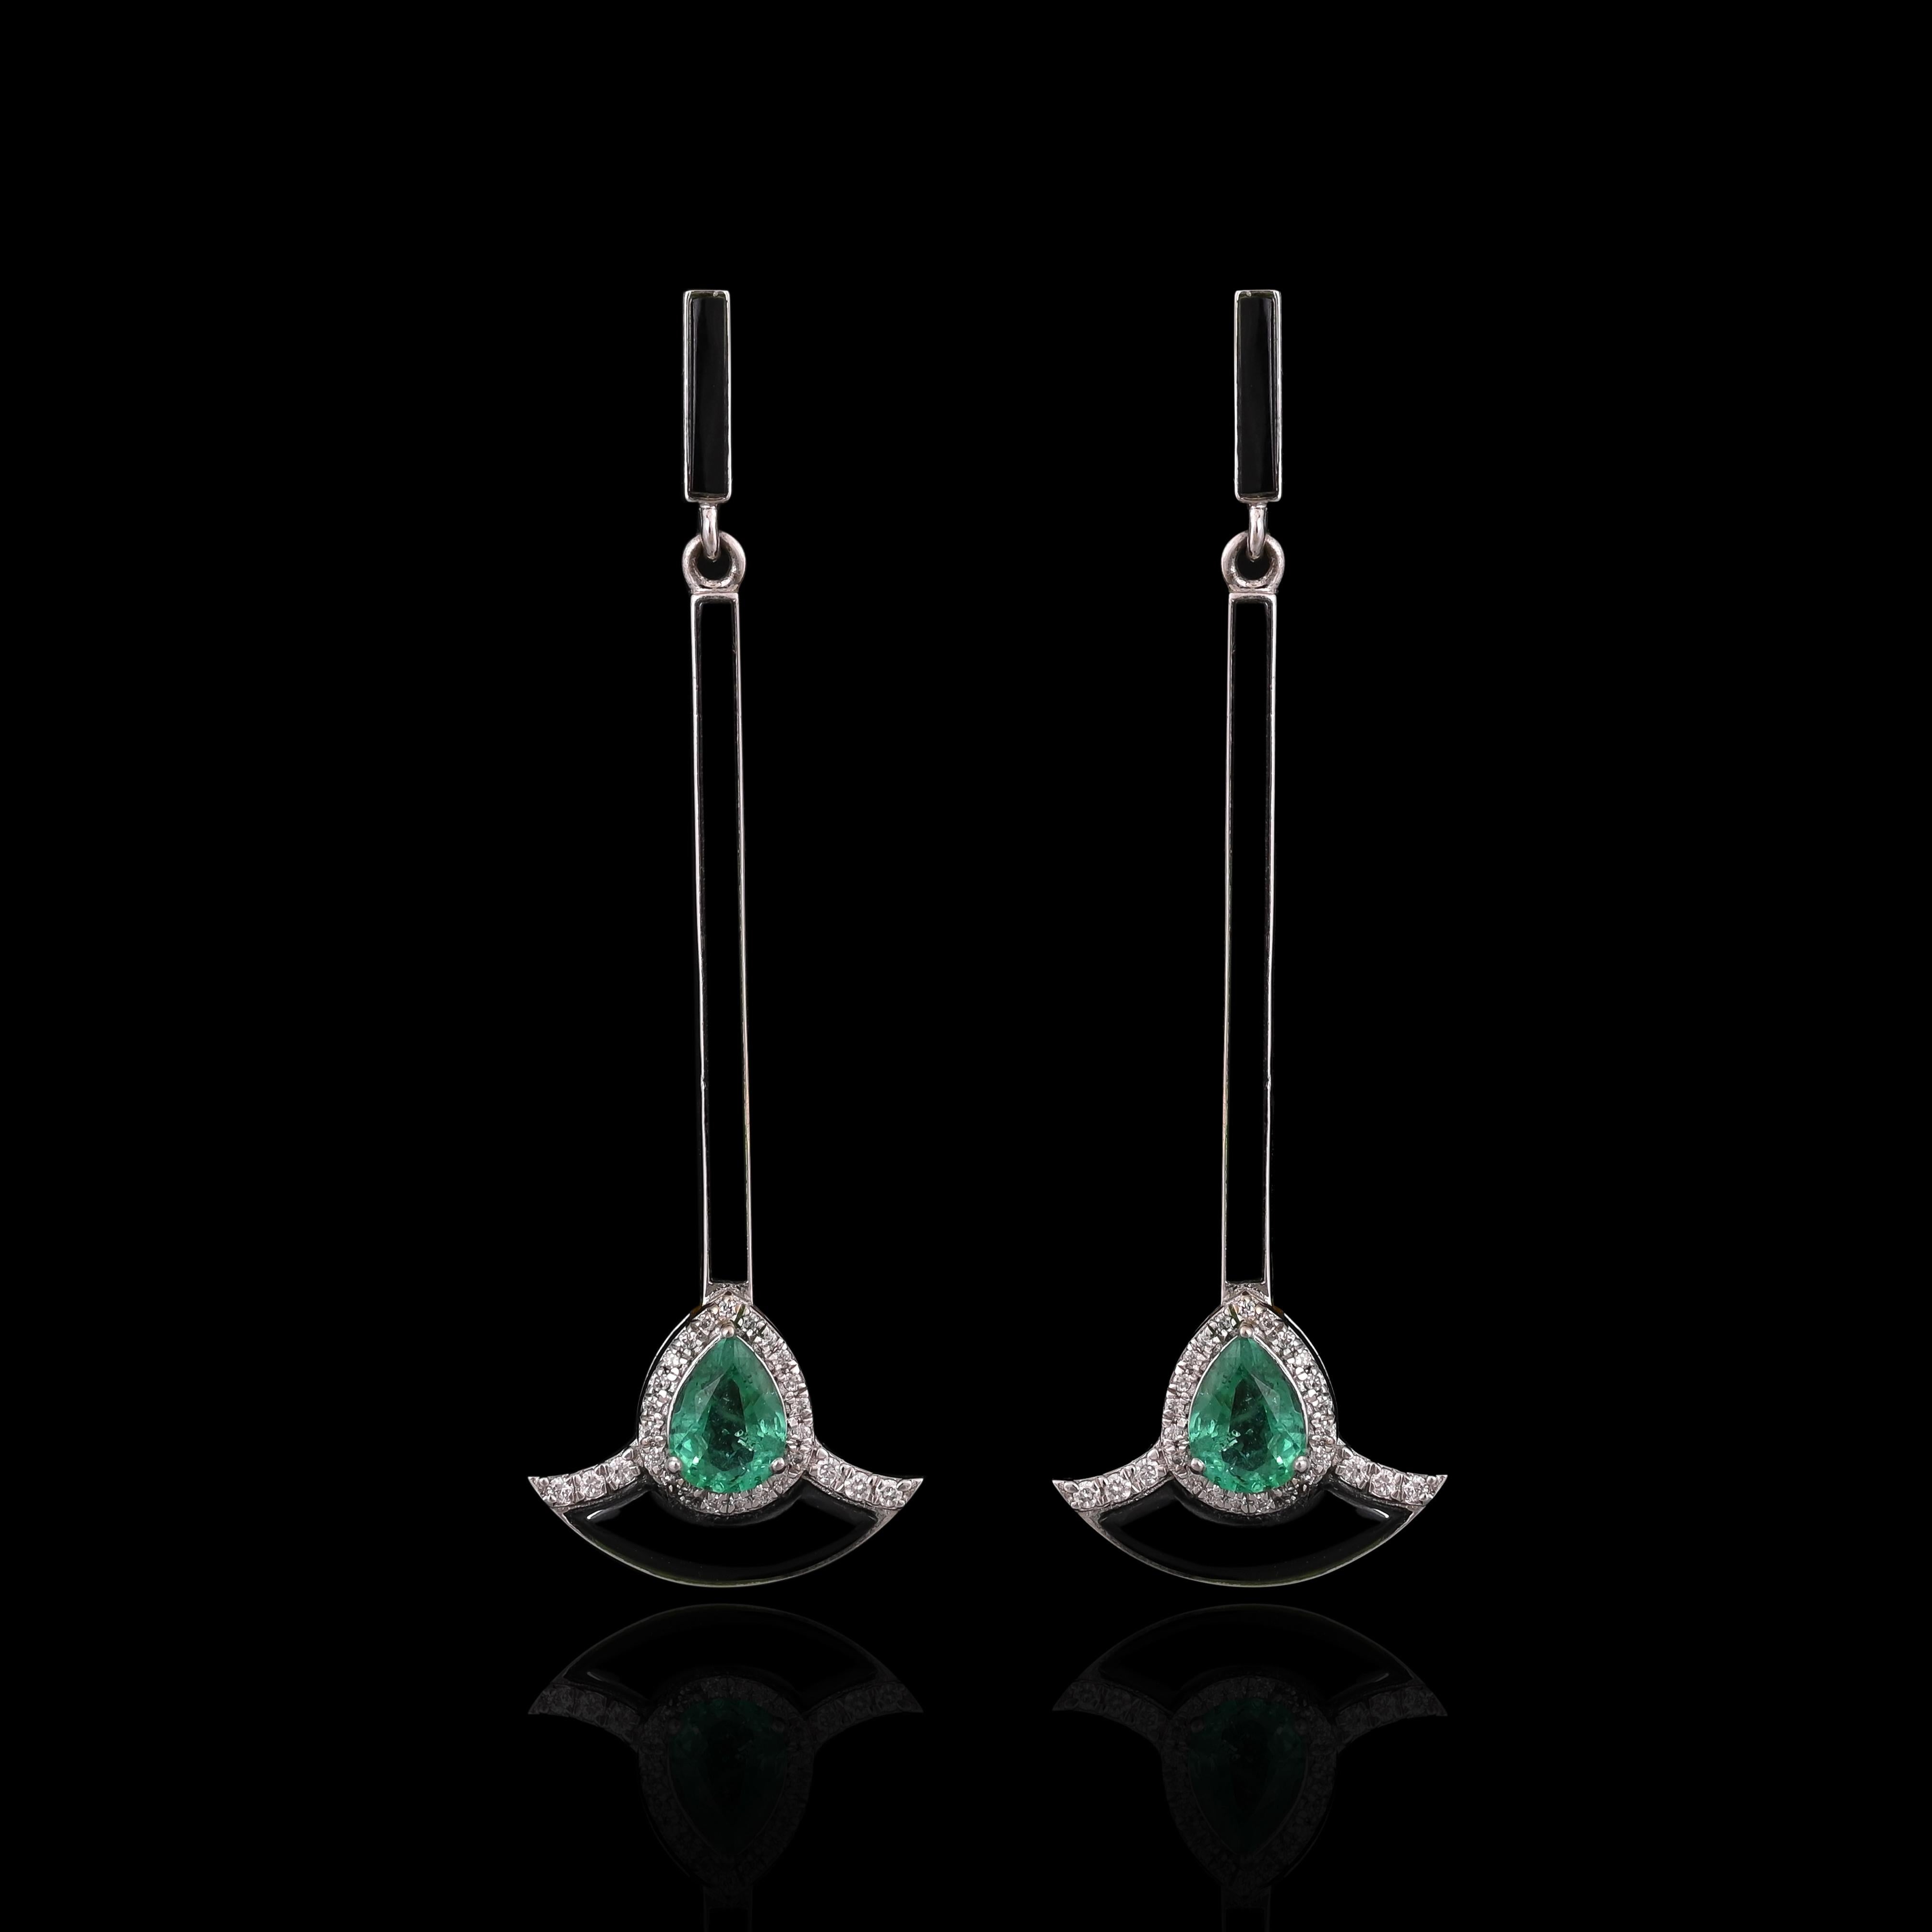 A very gorgeous and Art Deco style, Emerald Chandelier / Dangle Earrings set in 18K Gold & Diamonds. The weight of the Emeralds is 1.21 carats. The Emeralds are completely natural, without any treatment and is of Zambian origin. The weight of Black